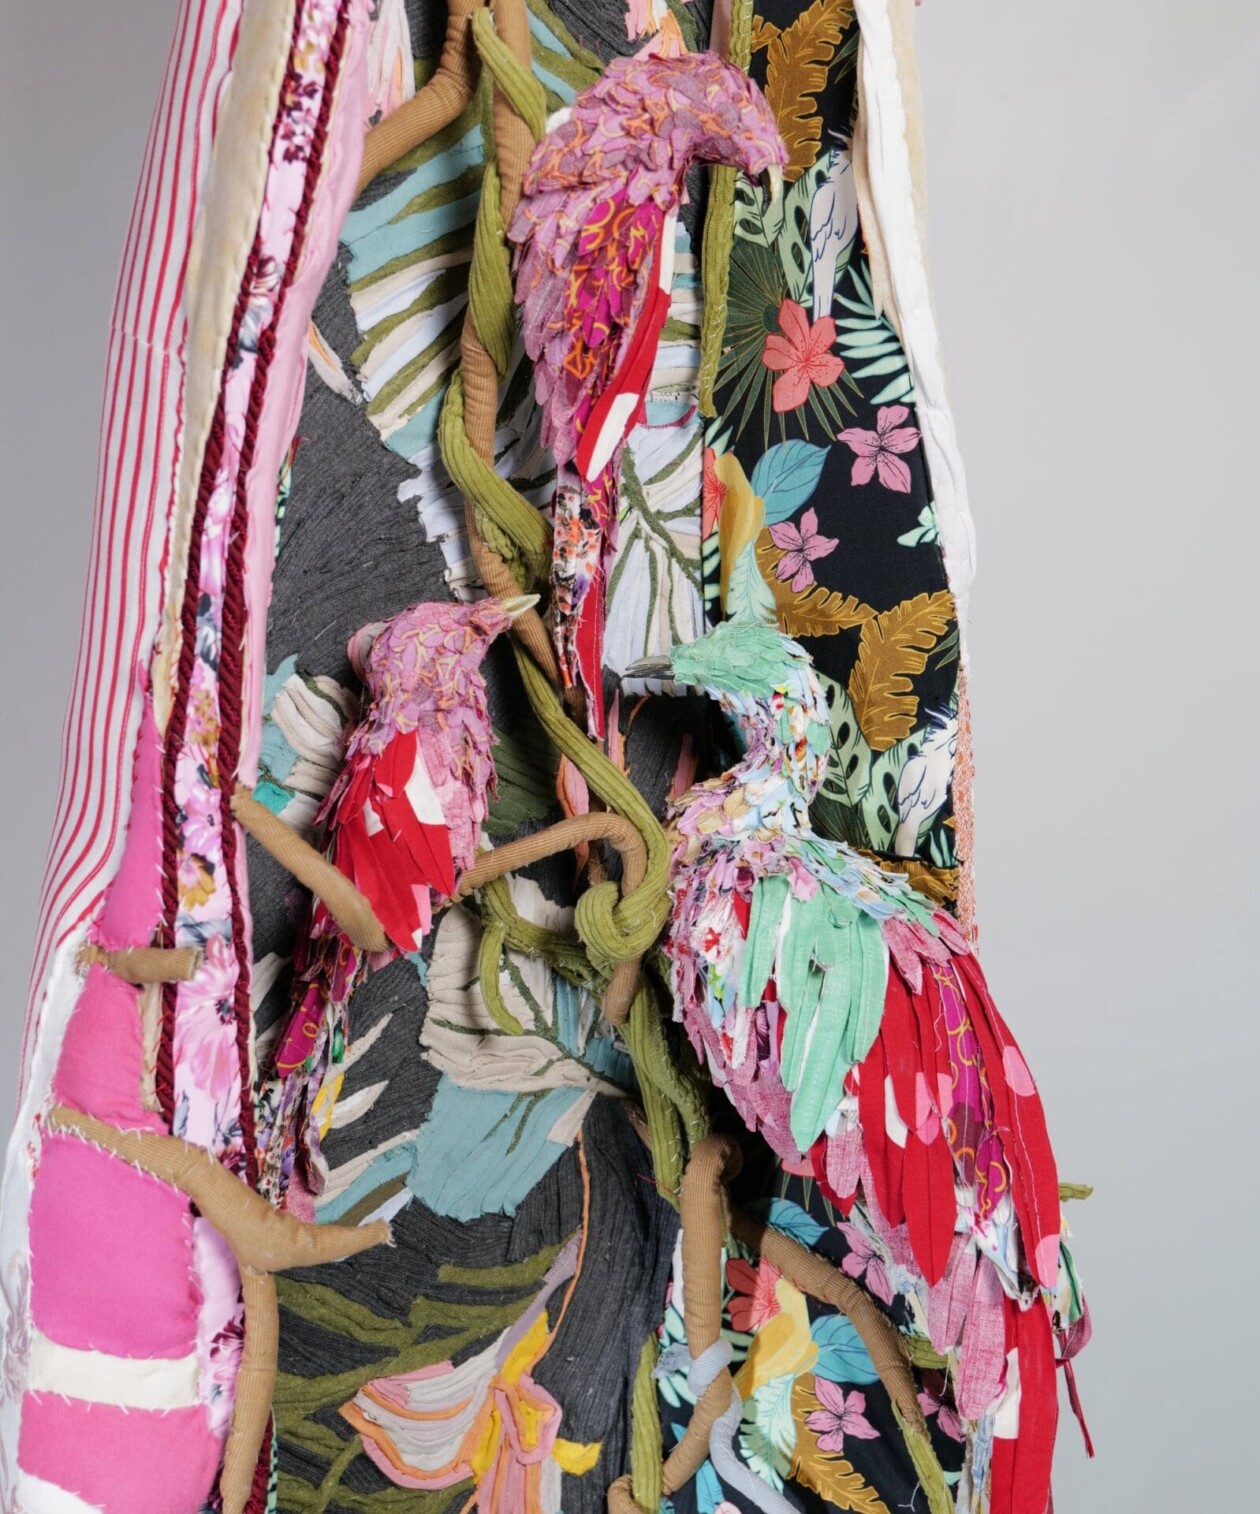 Thought Provoking Textile Sculptures Made From Discarded Fabrics By Tamara Kostianovsky (14)